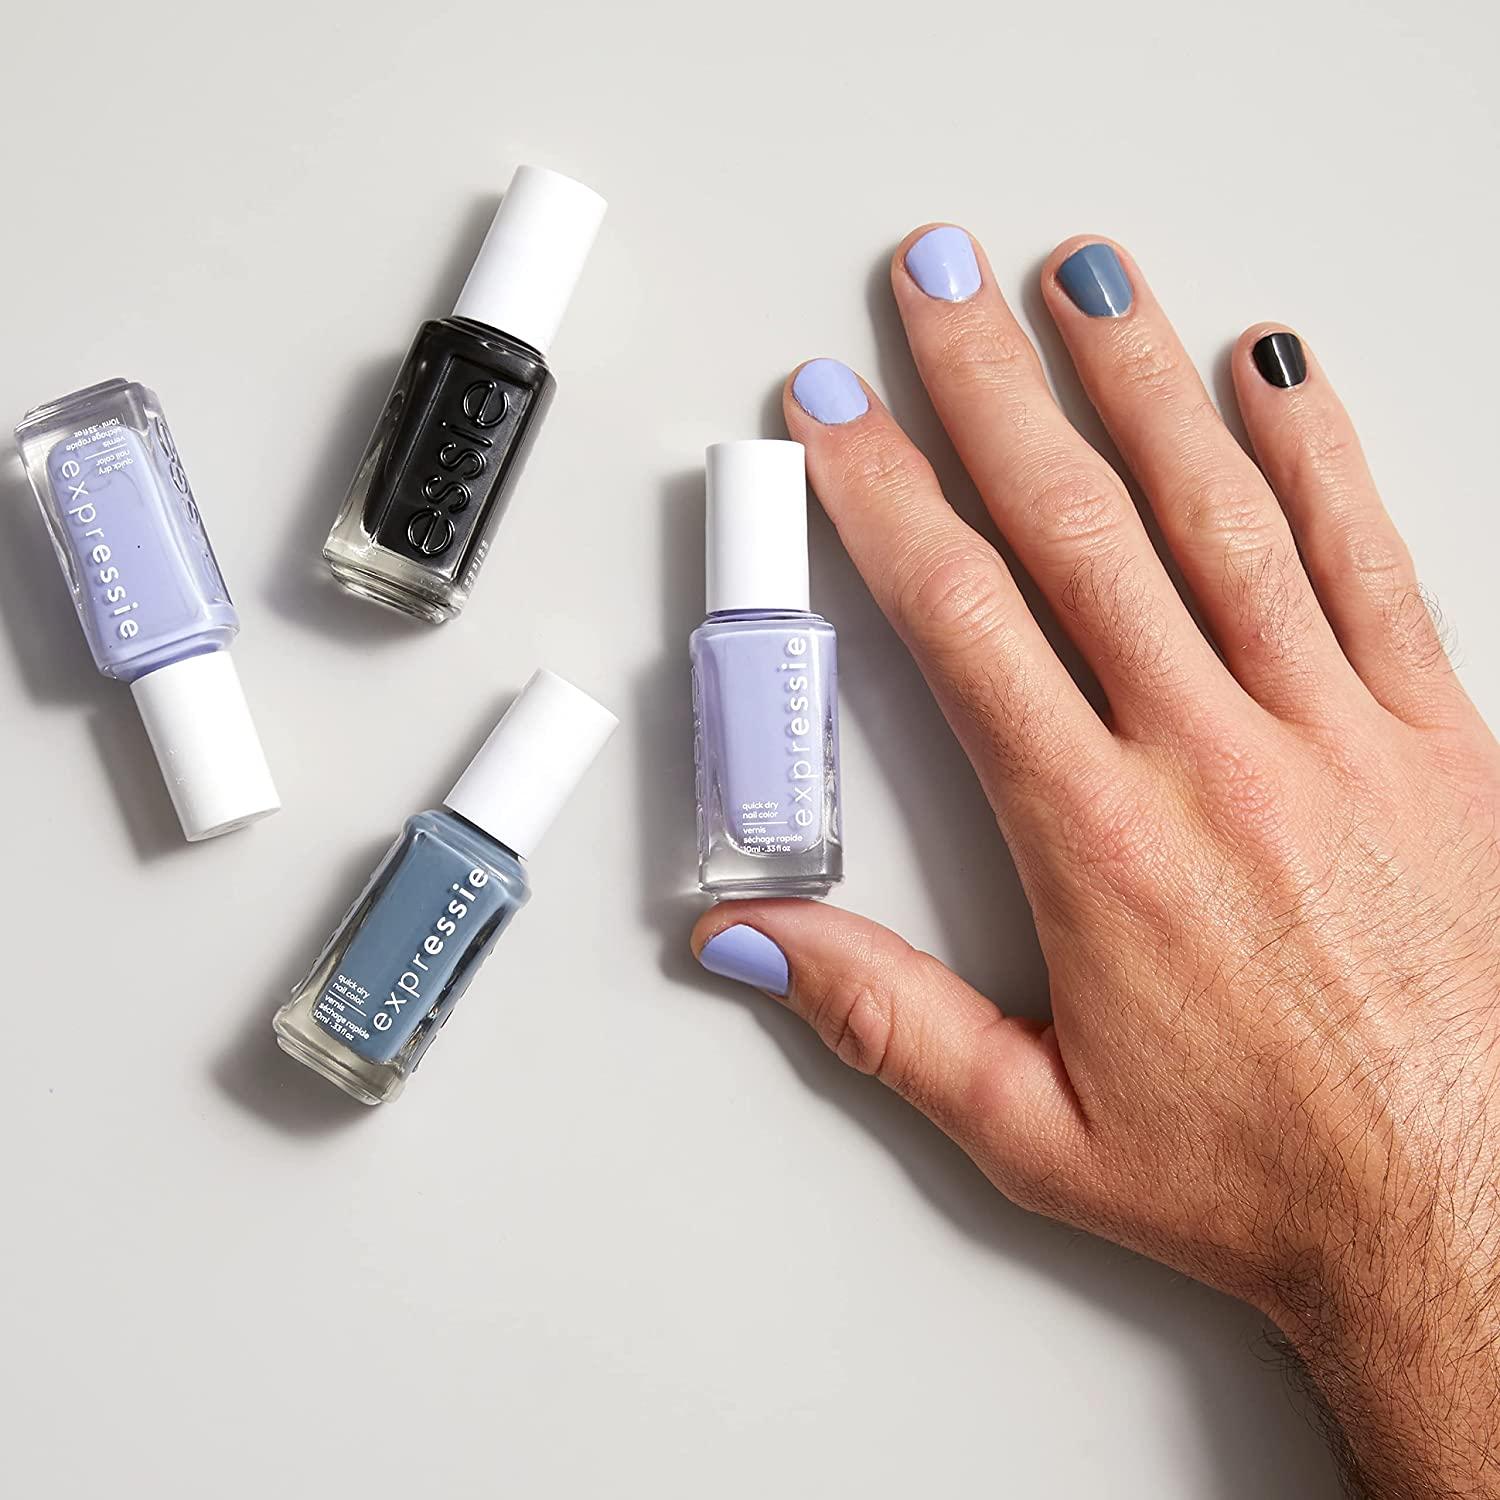 Vegan, essie with Lilac, Ounce 356 with of Nail (lilac sk8 Quick-Dry Polish, Oz blue Sk8 destiny 0.33 Fl expressie undertones) 8-Free Destiny, 0.33 with Destiny, (Pack with Sk8 1)